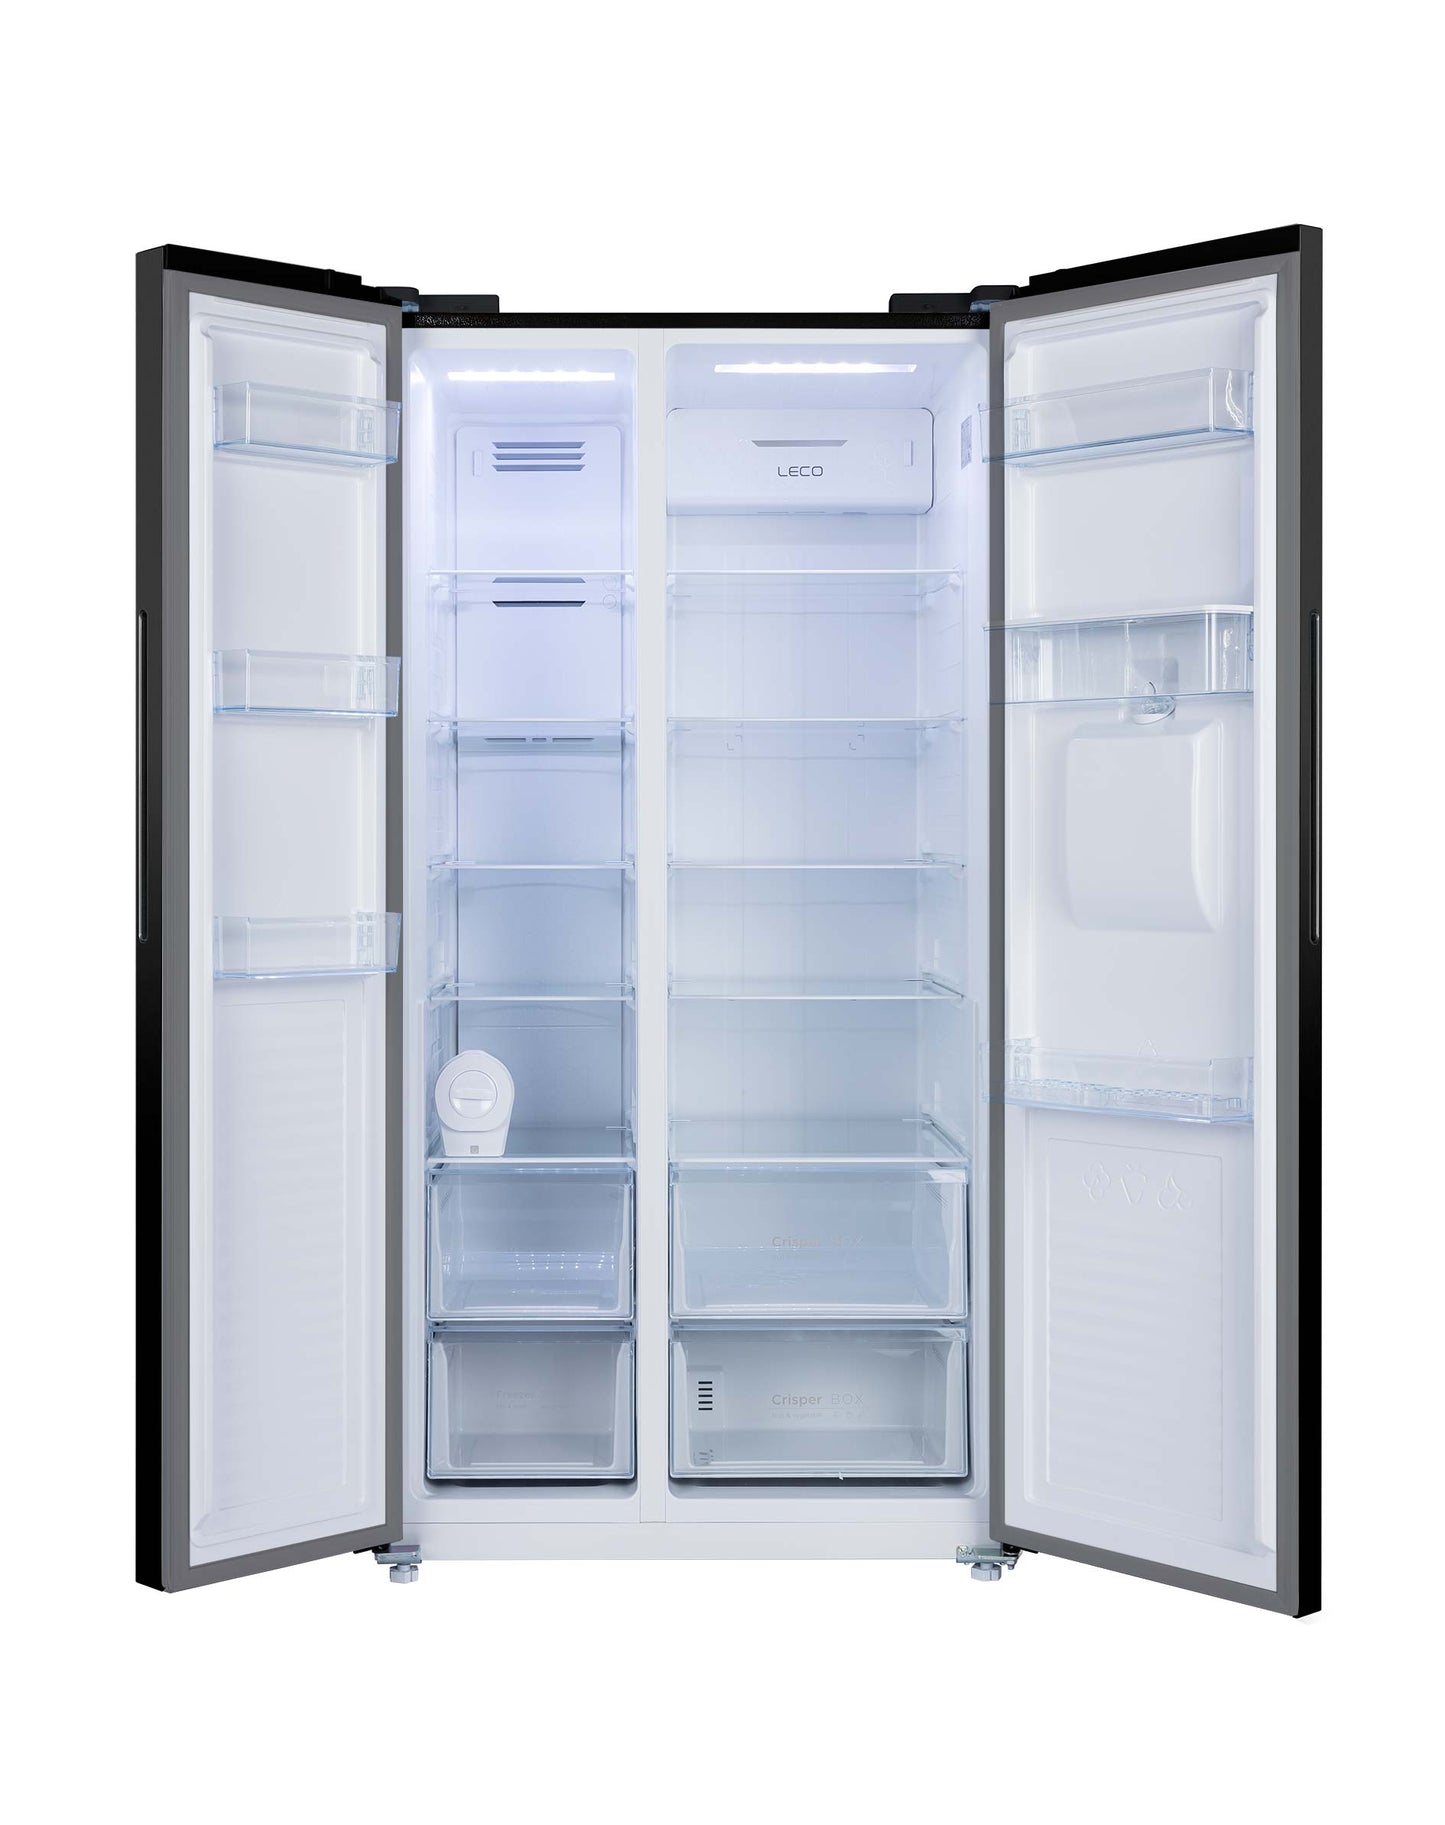 CHIQ 622LTR side by side refrigerator (DISPLAY STOCK)